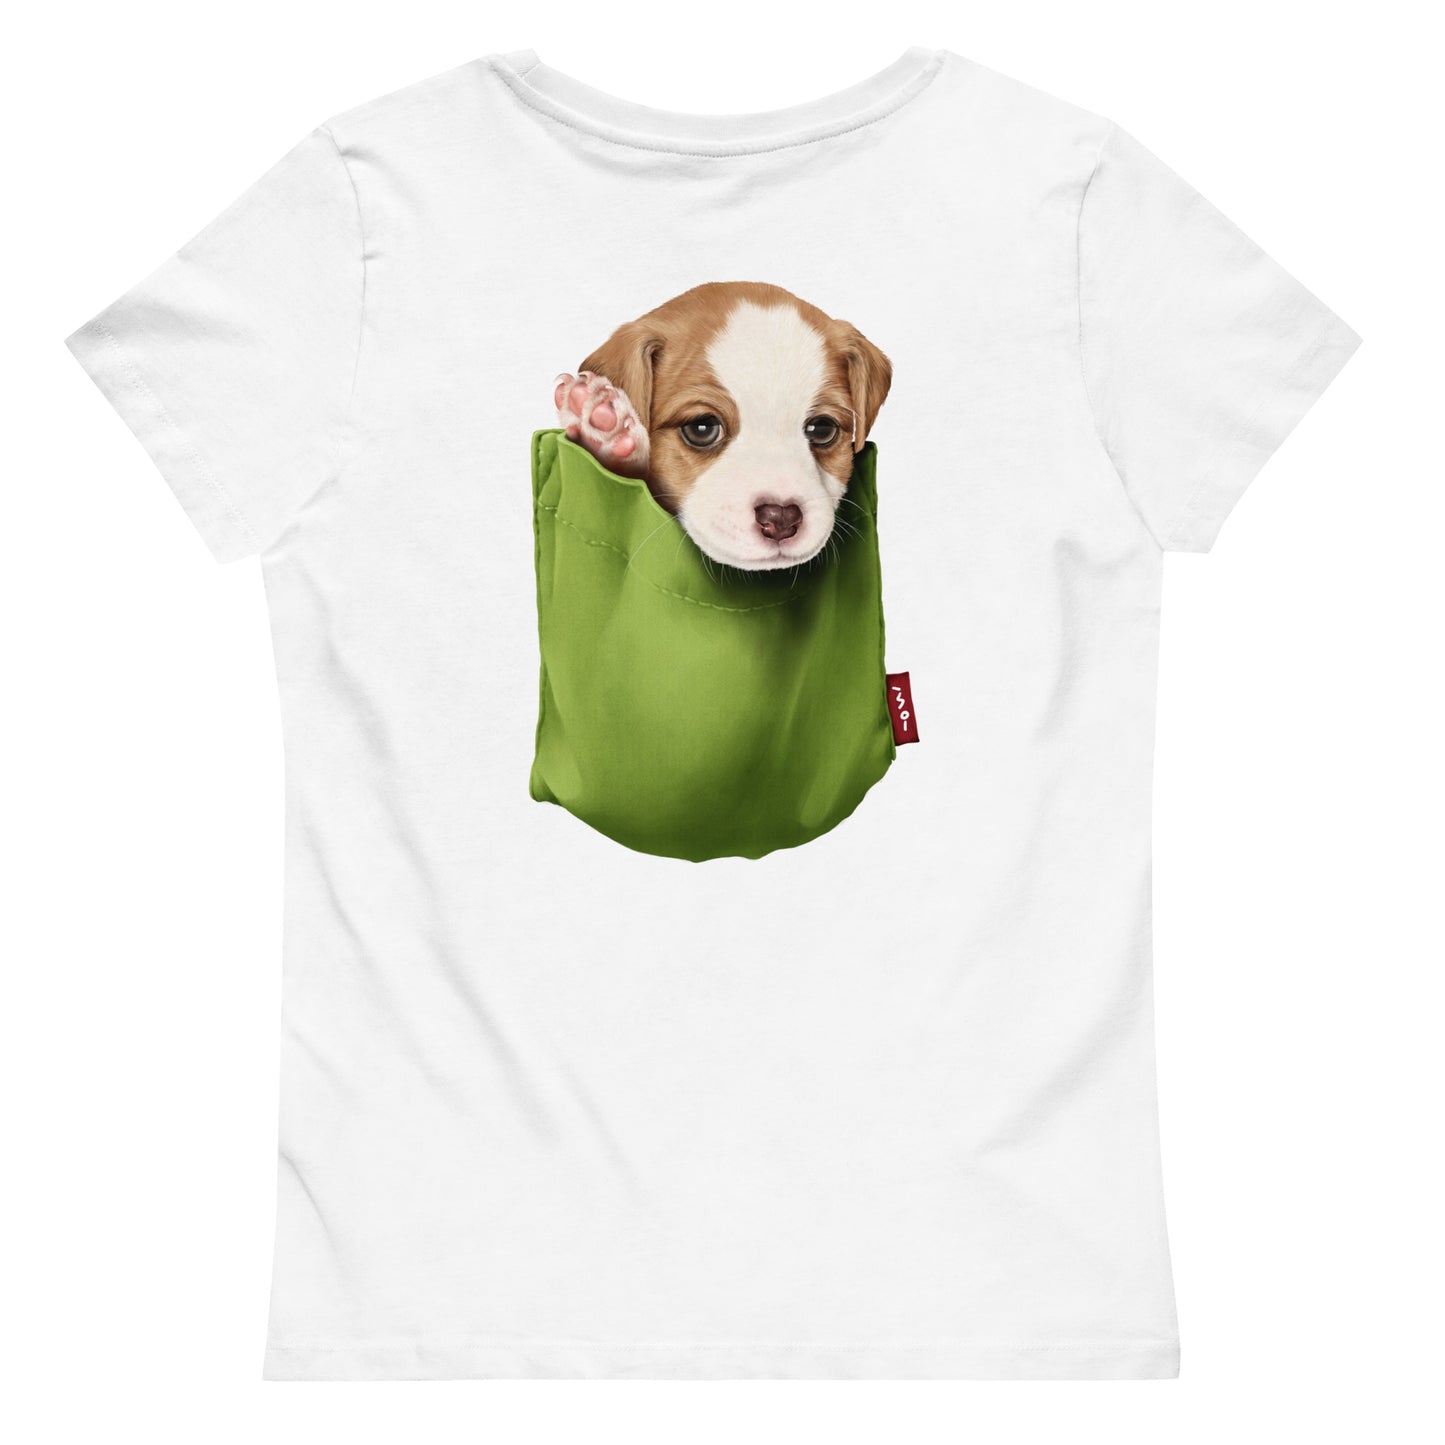 Jack Russell Terrier Women's fitted eco tee